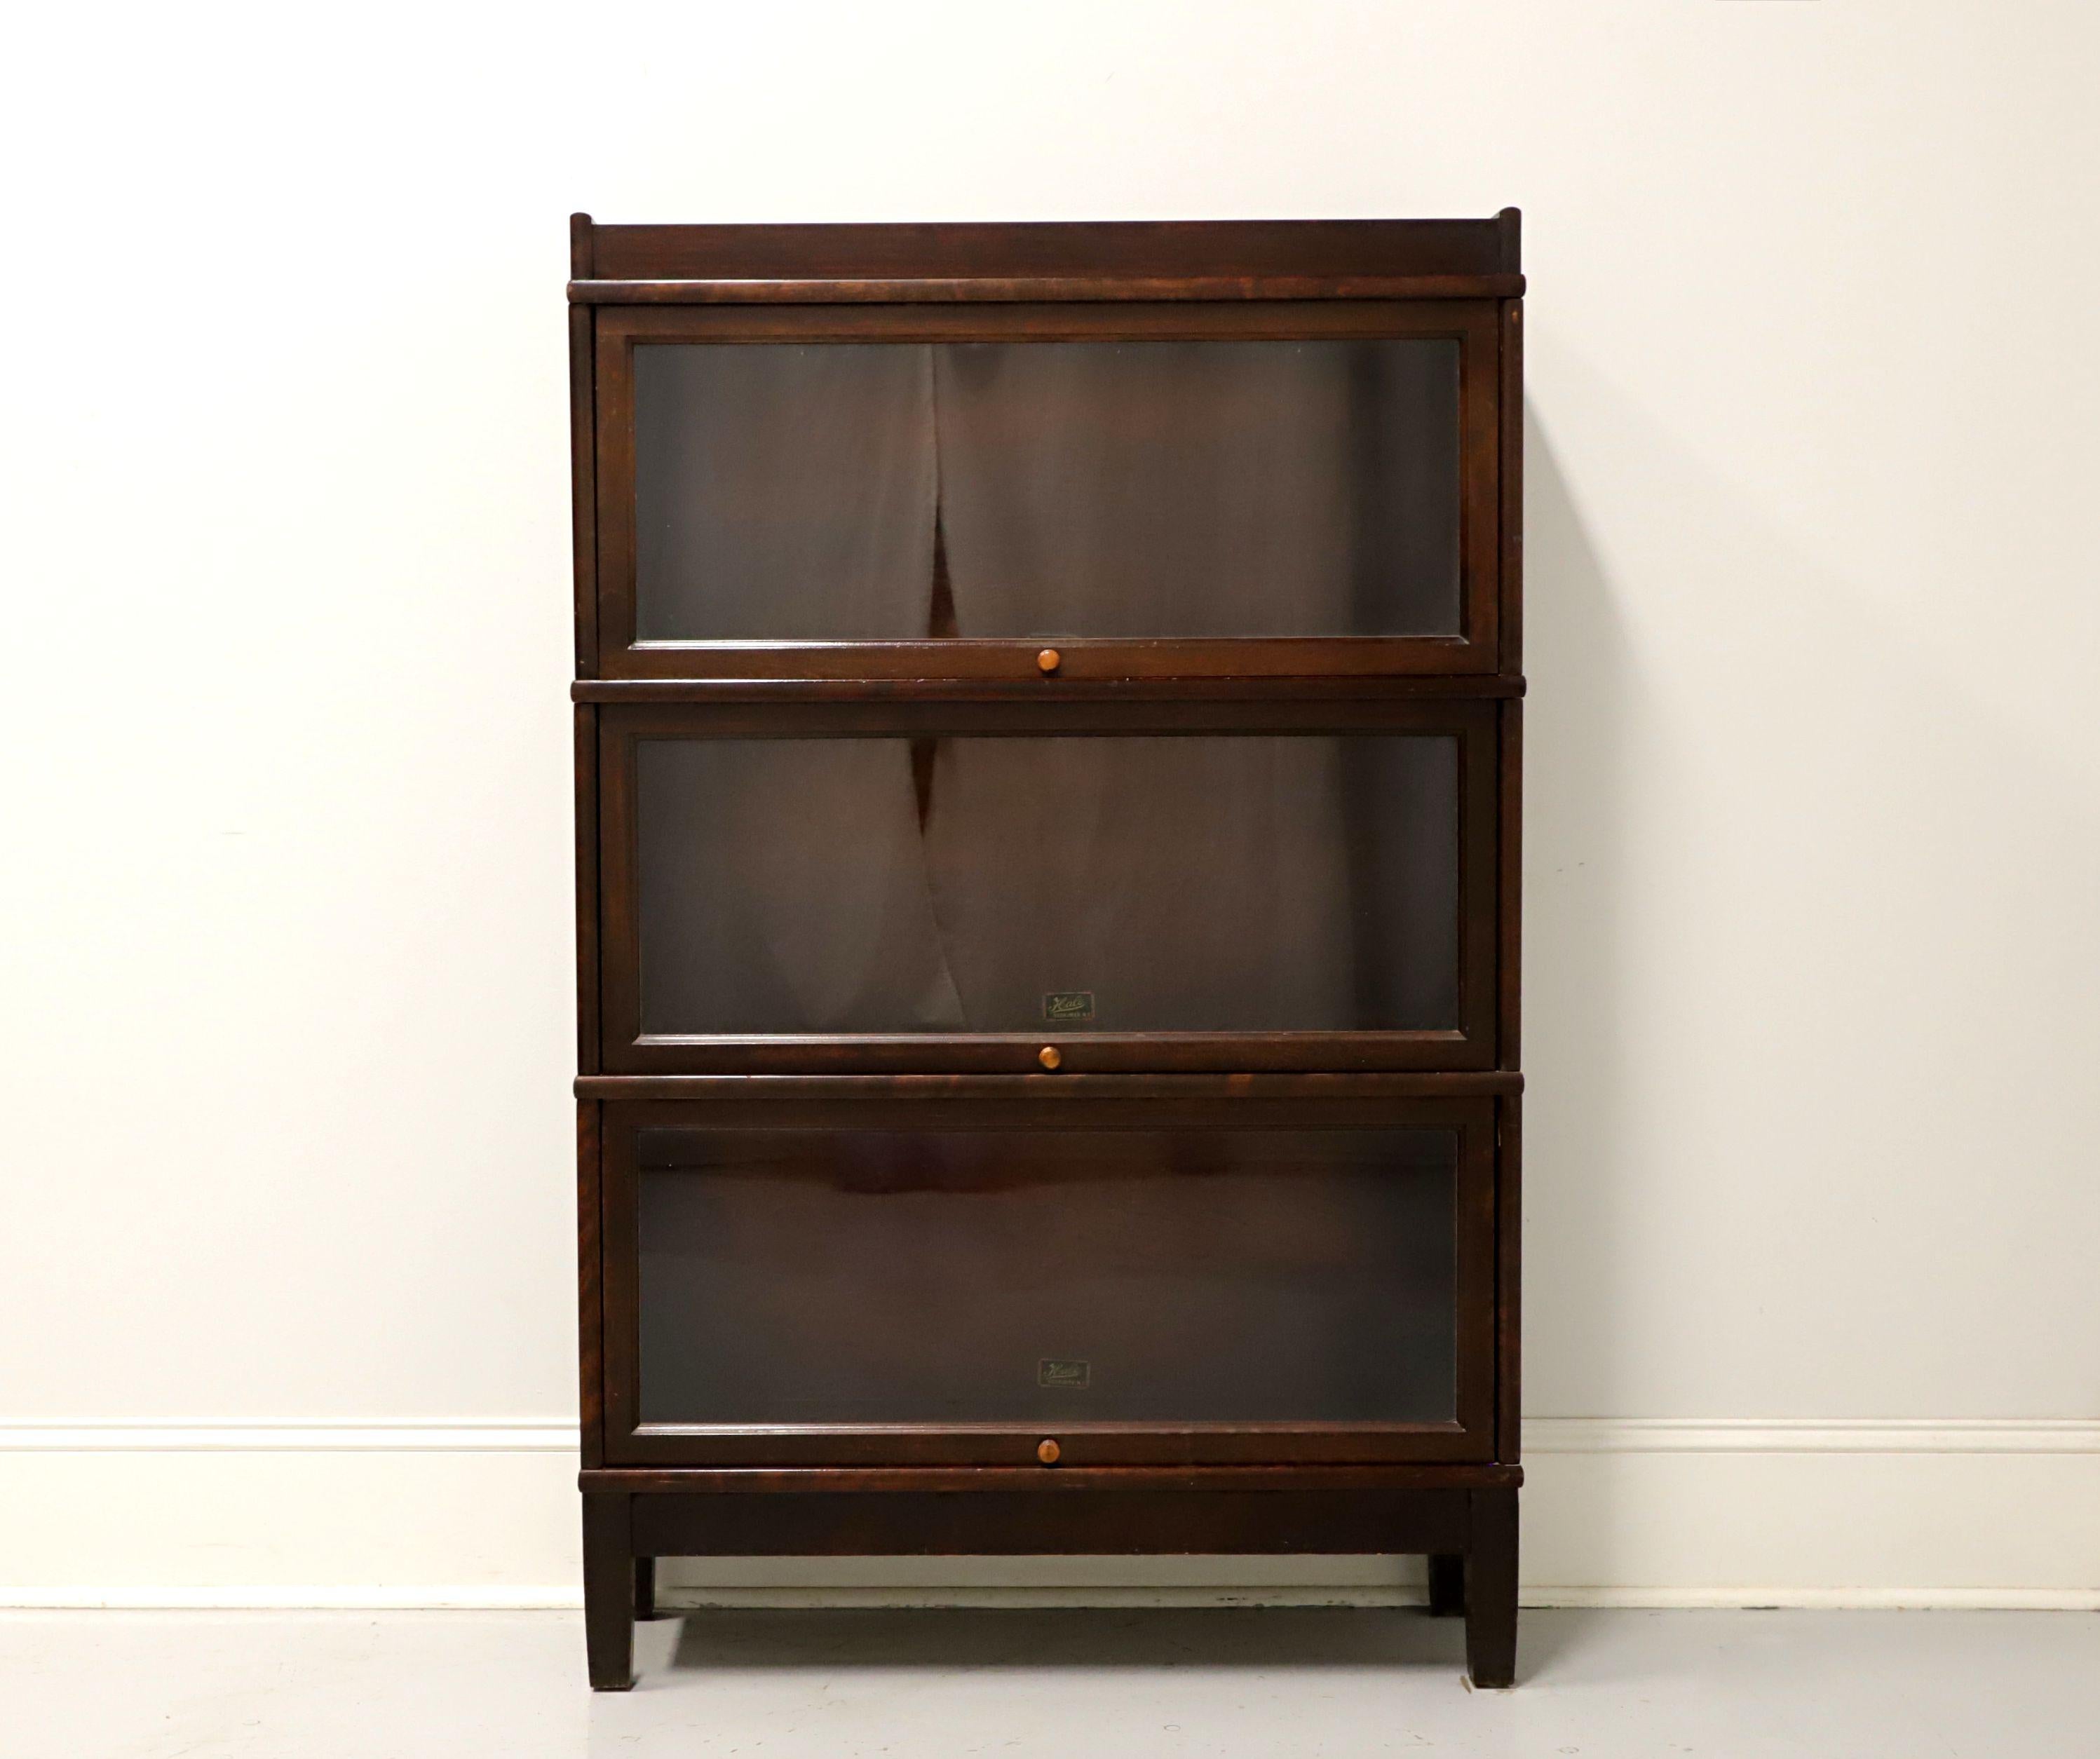 An Arts & Crafts style stacking barrister bookcase by Hale of Herkimer, New York, USA. Mahogany with wood knobs and metal slide mechanisms. Features crown, three stacking flip up slide back glass door bookcase units and base with straight legs. Each